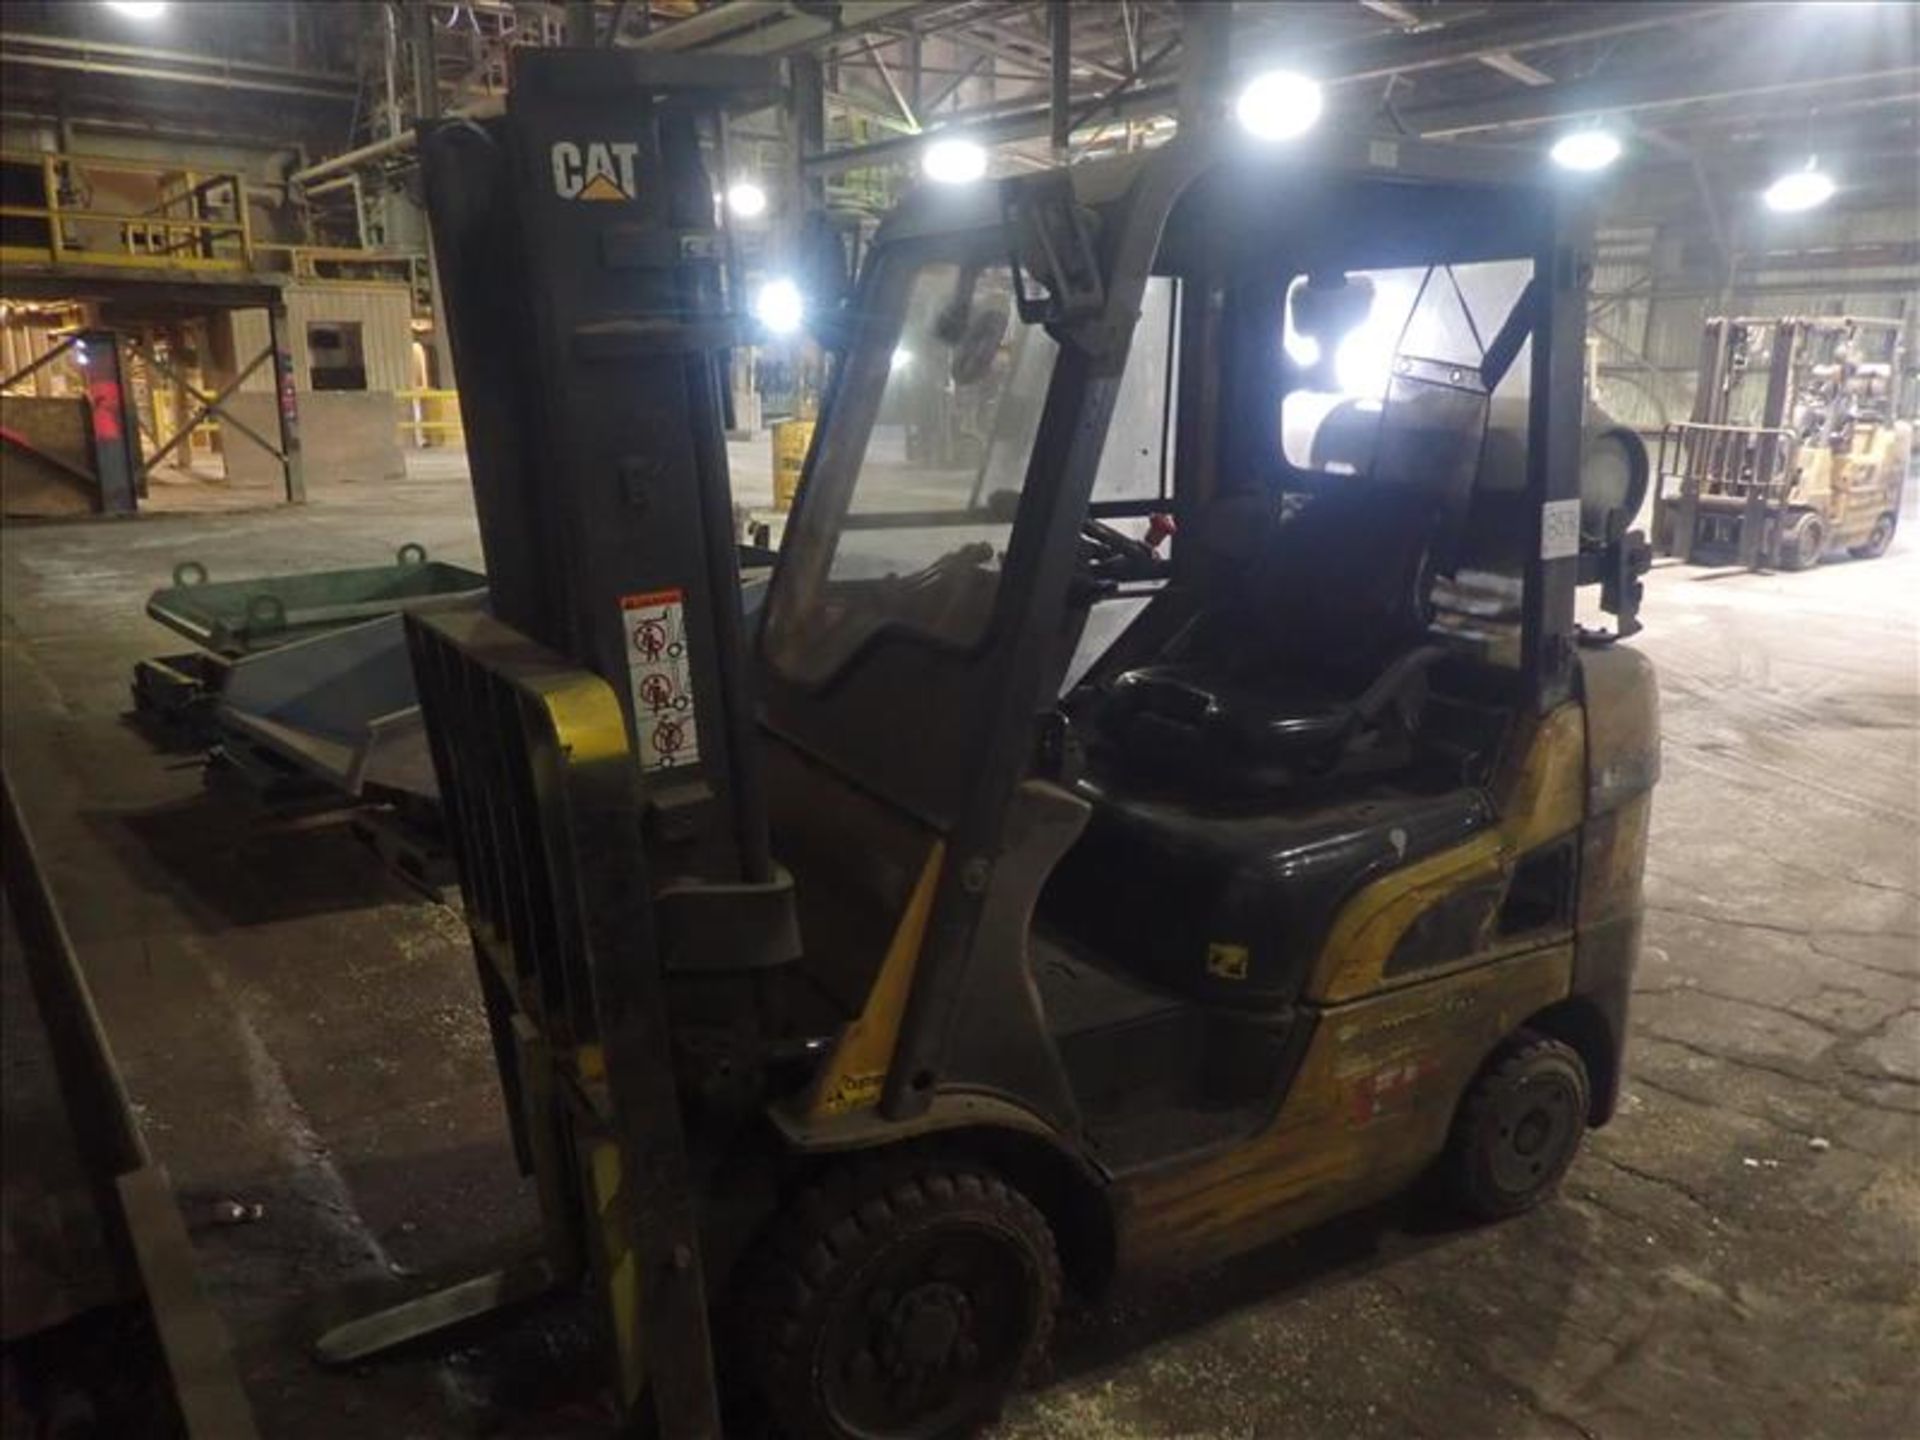 CAT forklift truck, mod. C5000, ser. no. N/A, N/A lbs cap., propane, 2-stage mast, cab, hour meter